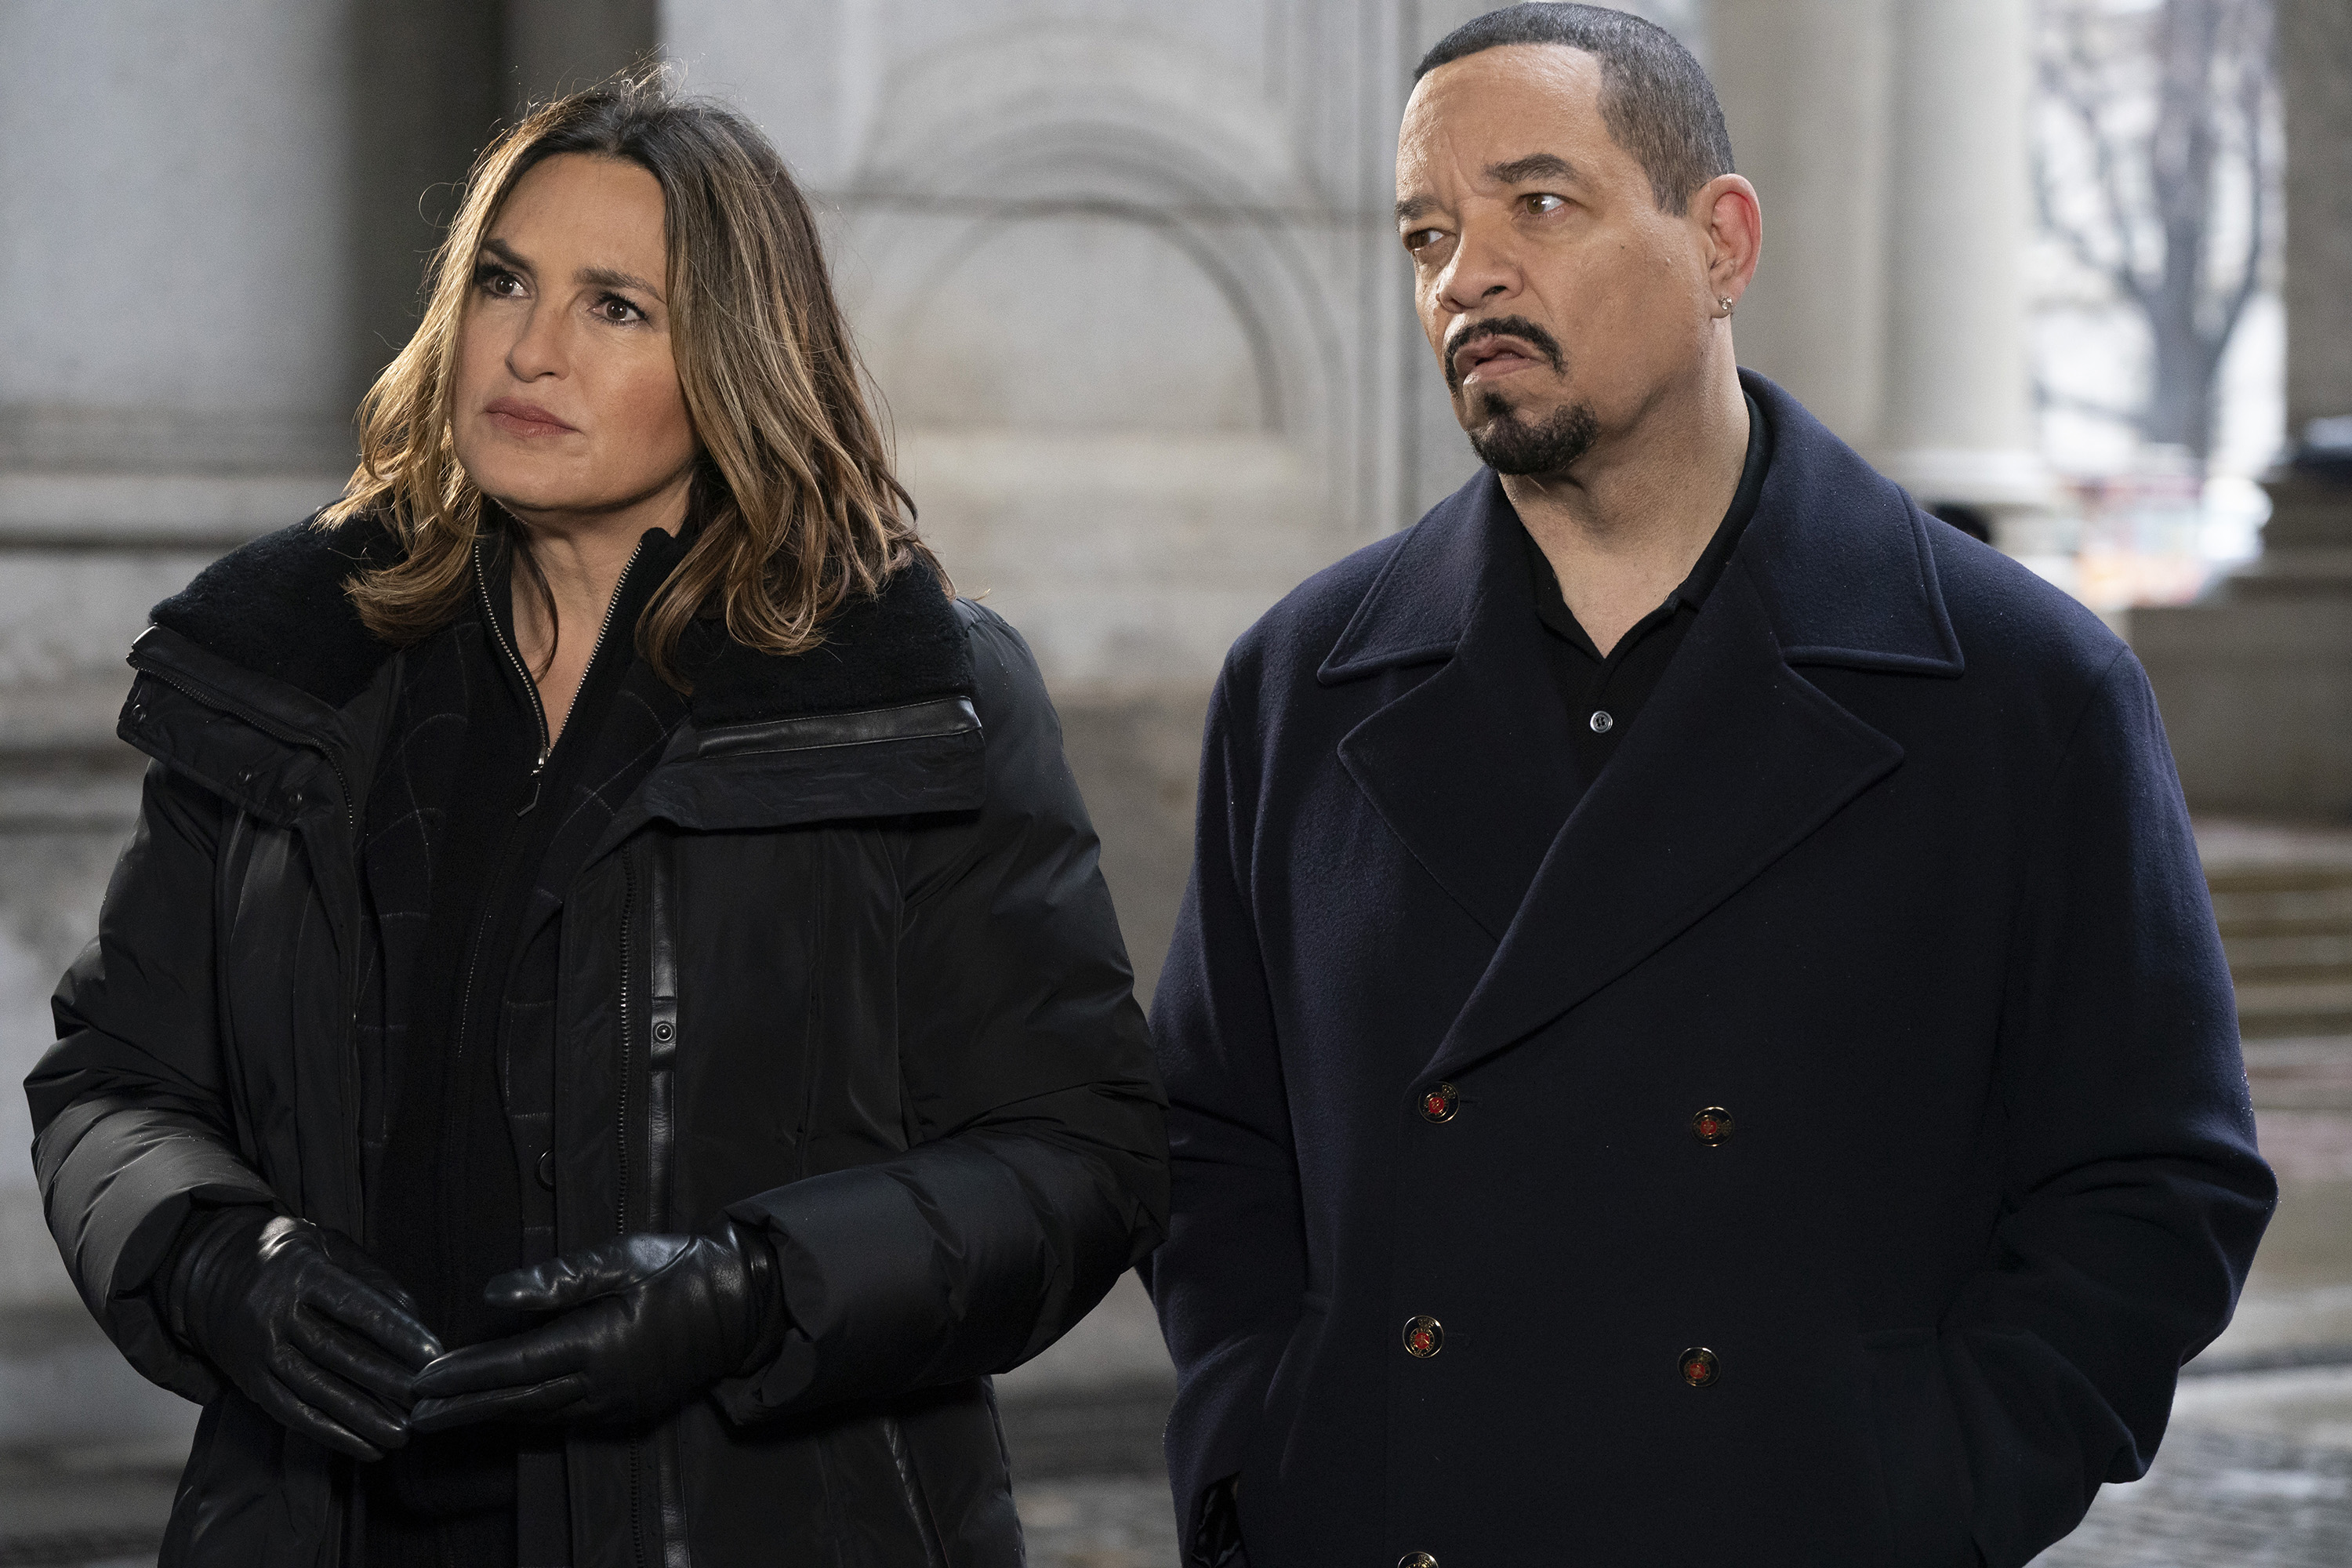 Law & Order: Special Victims Unit News, Rumors, and Features